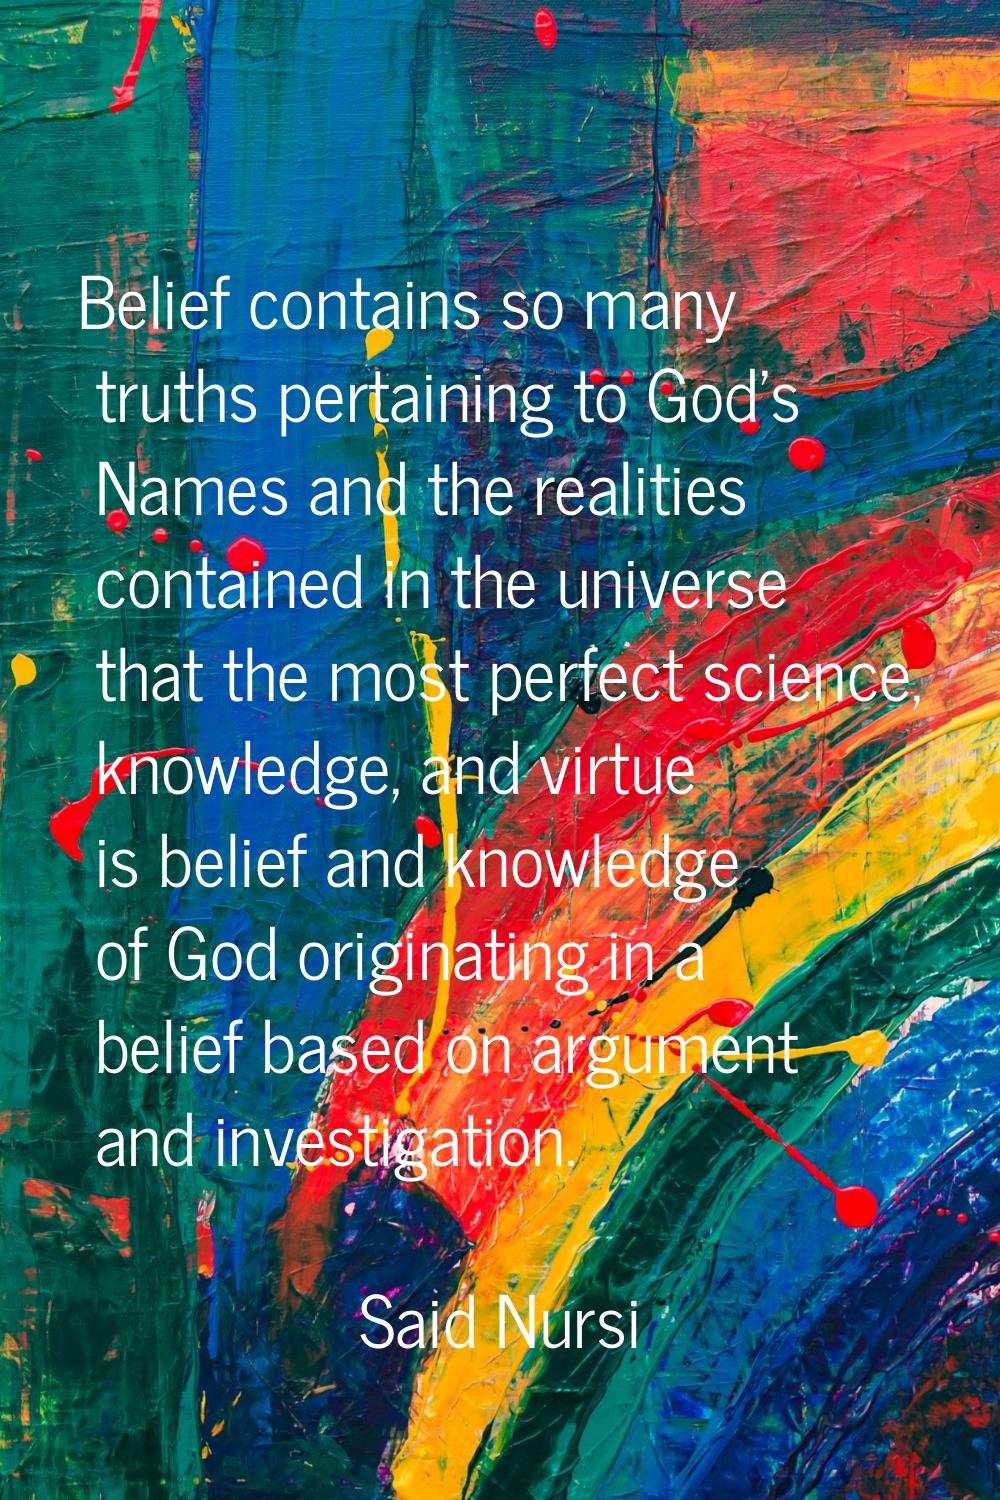 Belief contains so many truths pertaining to God's Names and the realities contained in the univers